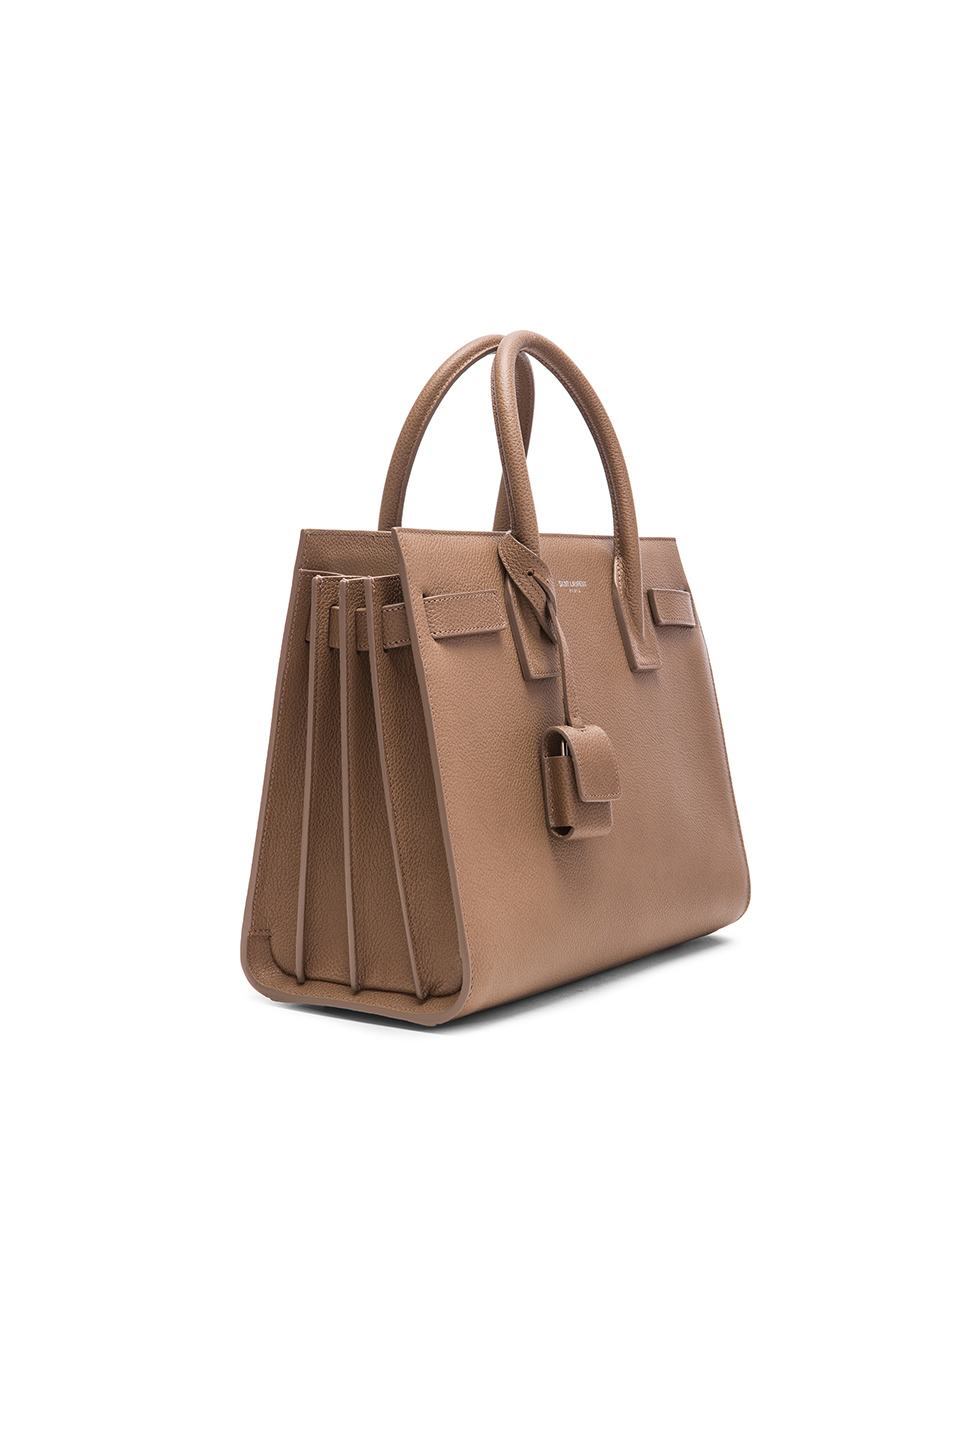 ysl bags outlet uk - sac de jour small satchel bag, taupe